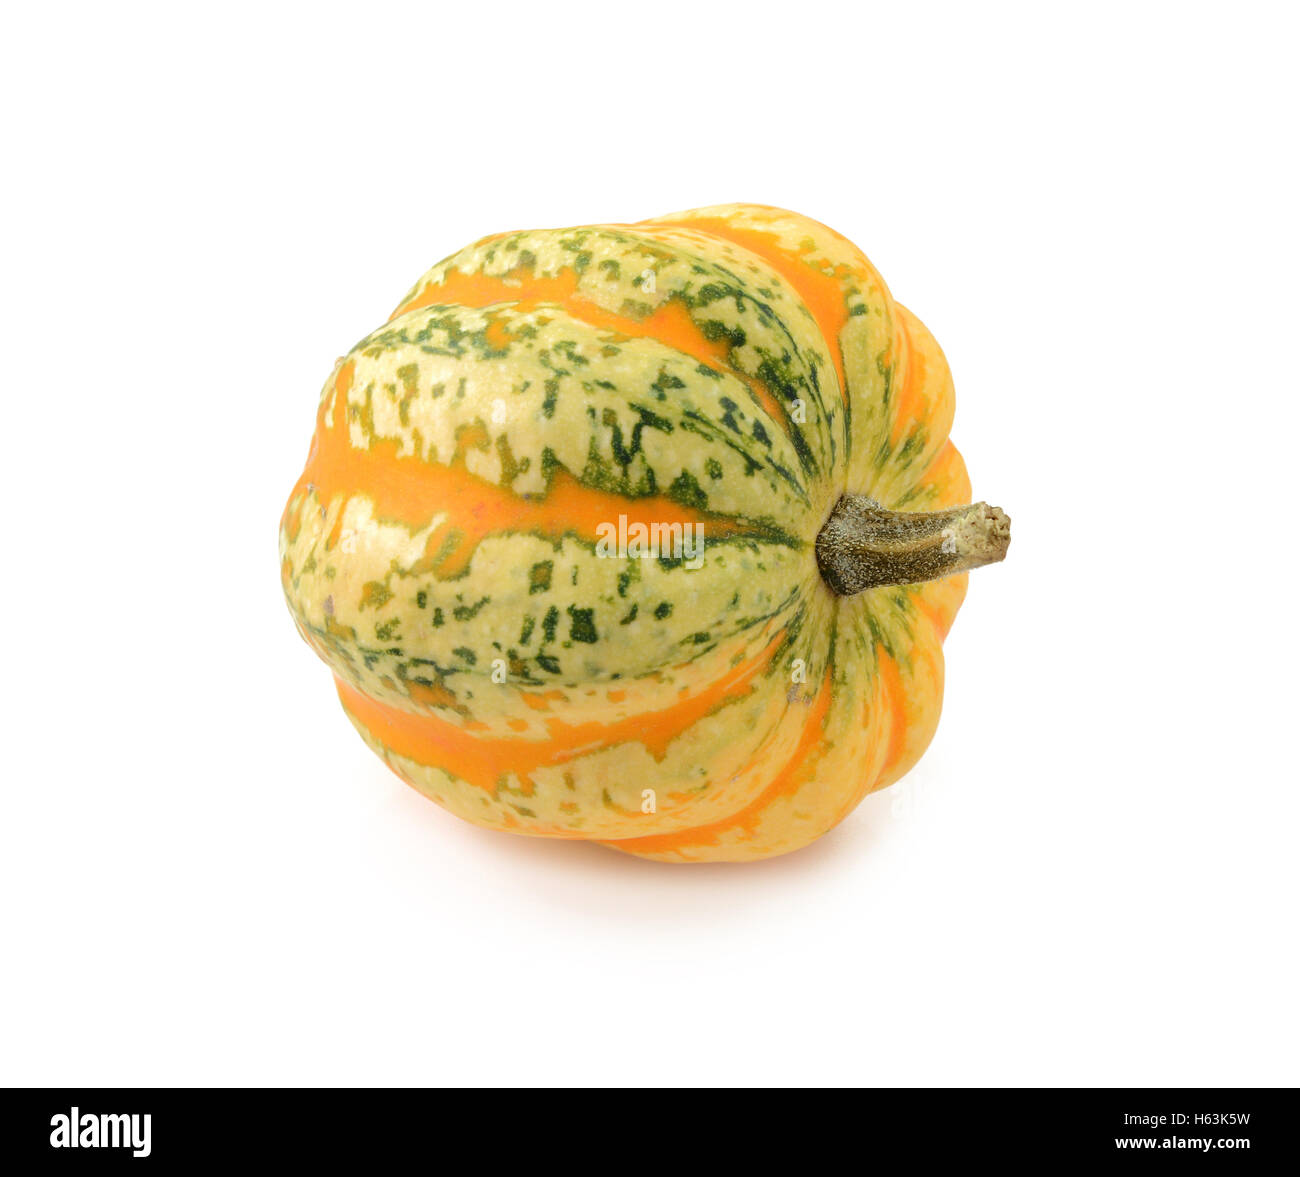 Green and yellow striped Festival squash, isolated on a white background Stock Photo